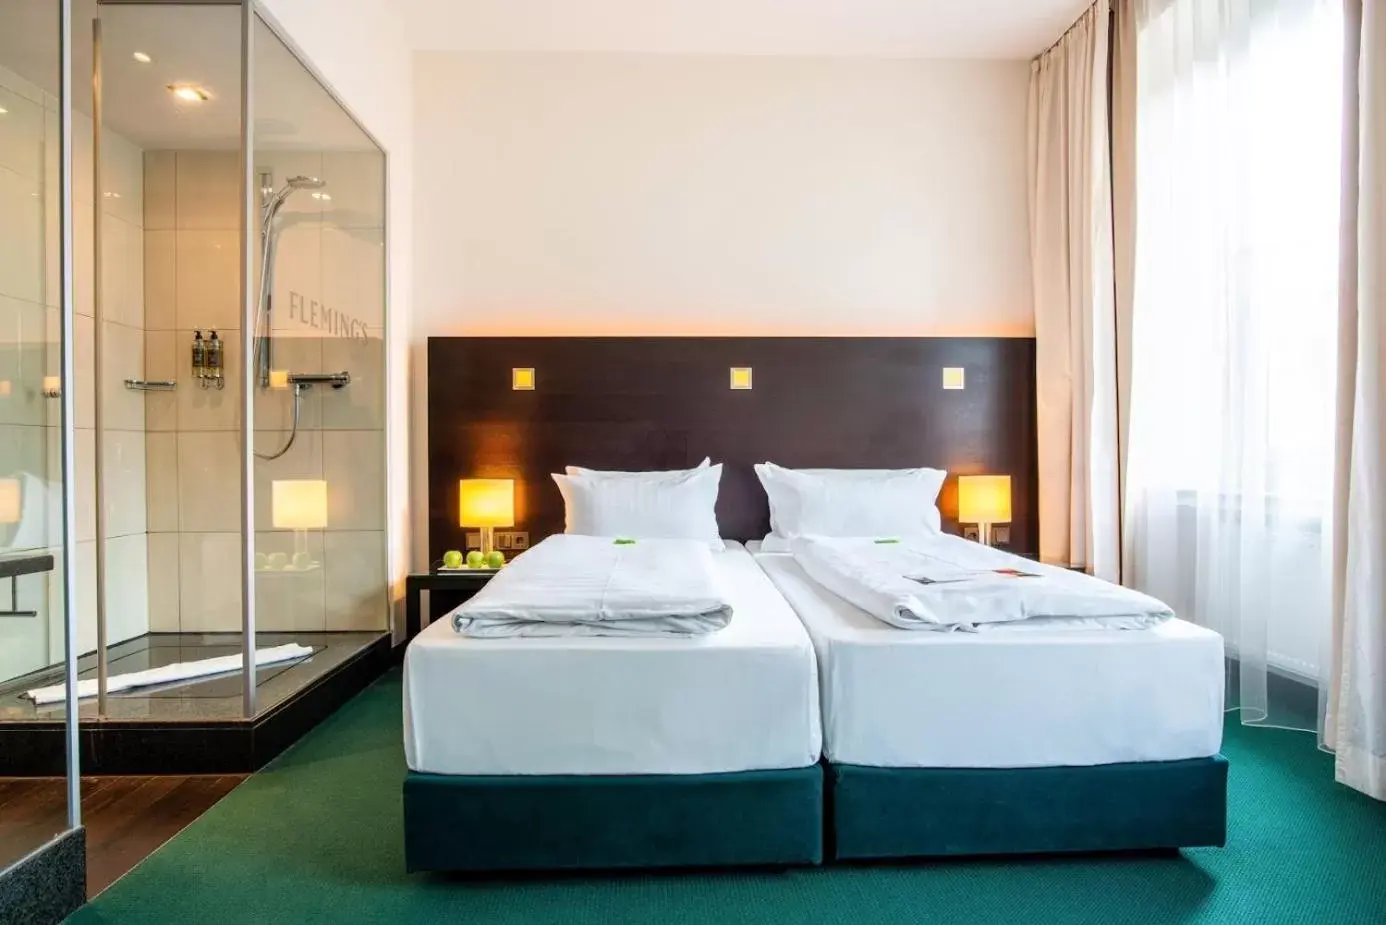 Superior Double Room in Flemings Hotel München-City